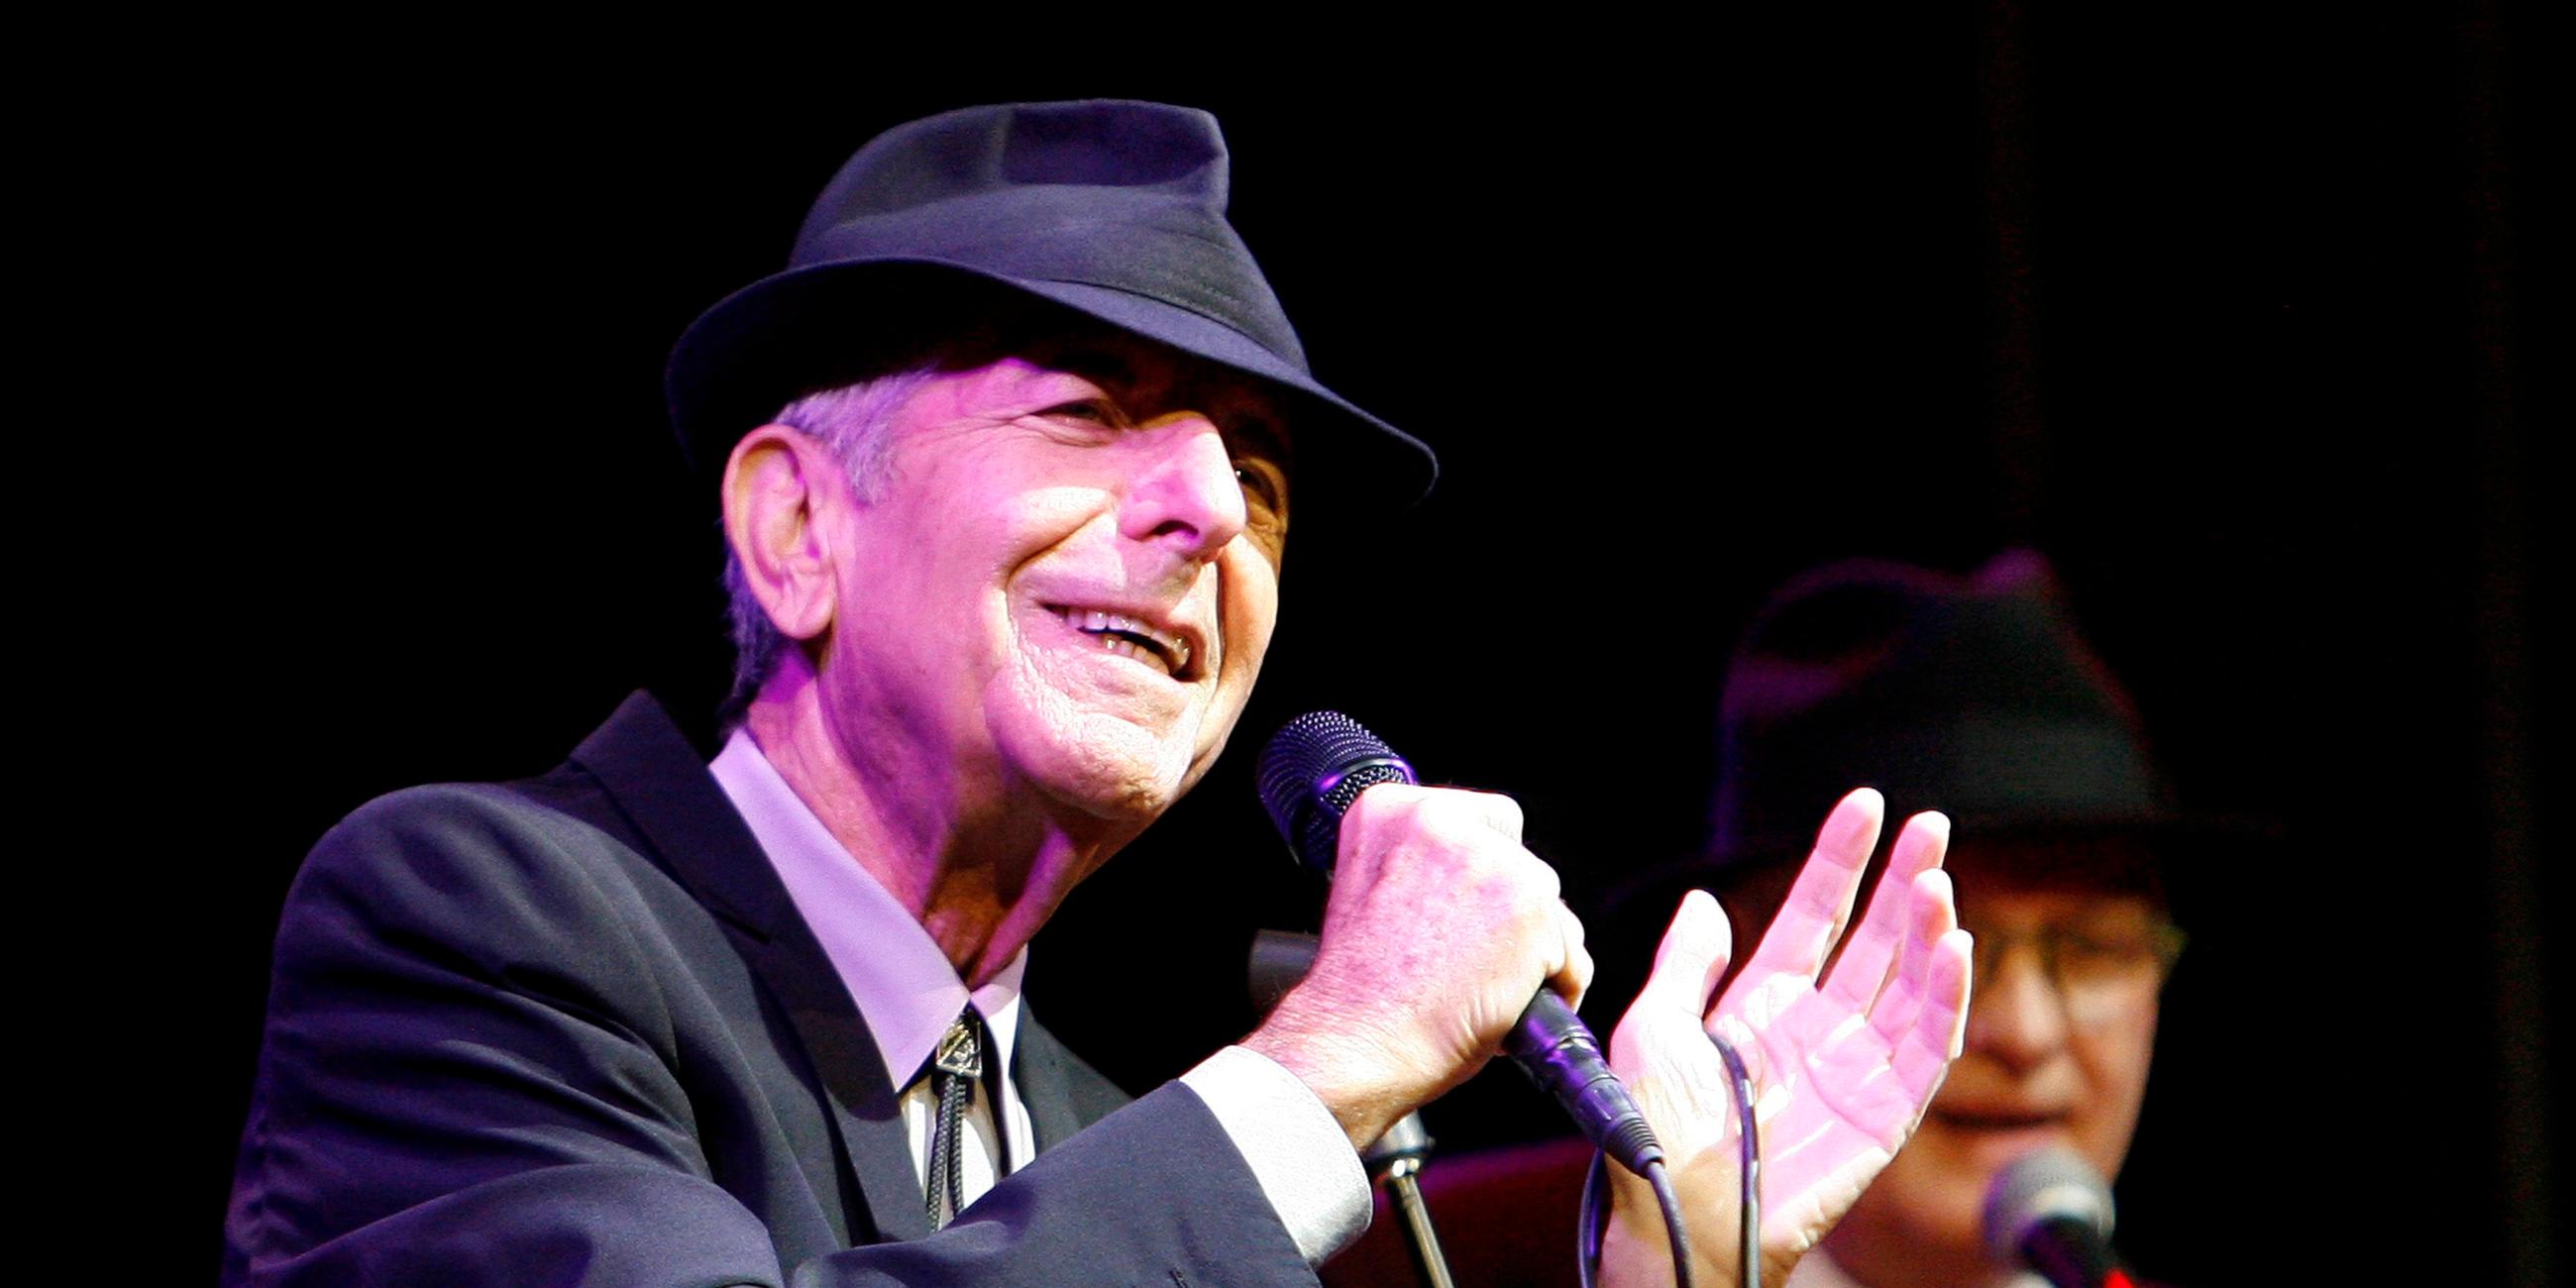 canadian singer-songwriter leonard cohen performs at the coachella music festival in indio